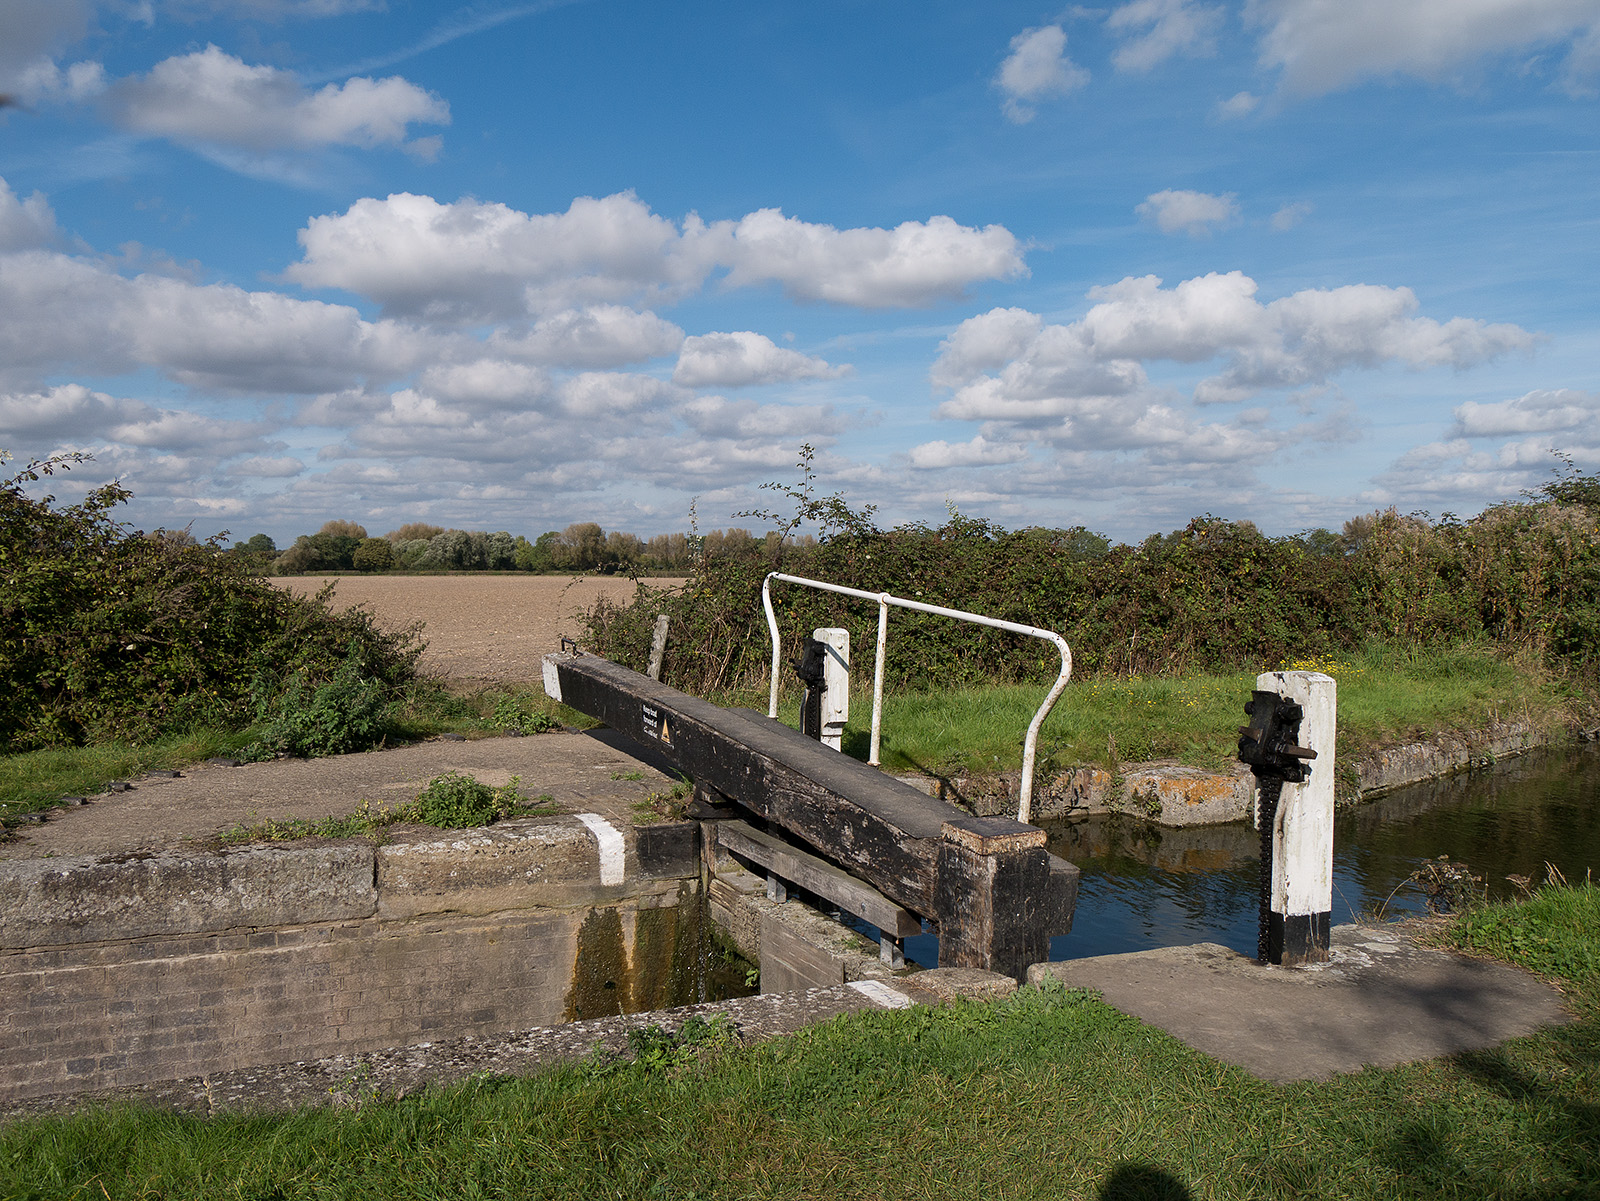 Another single lock gate with narrow lock channel.